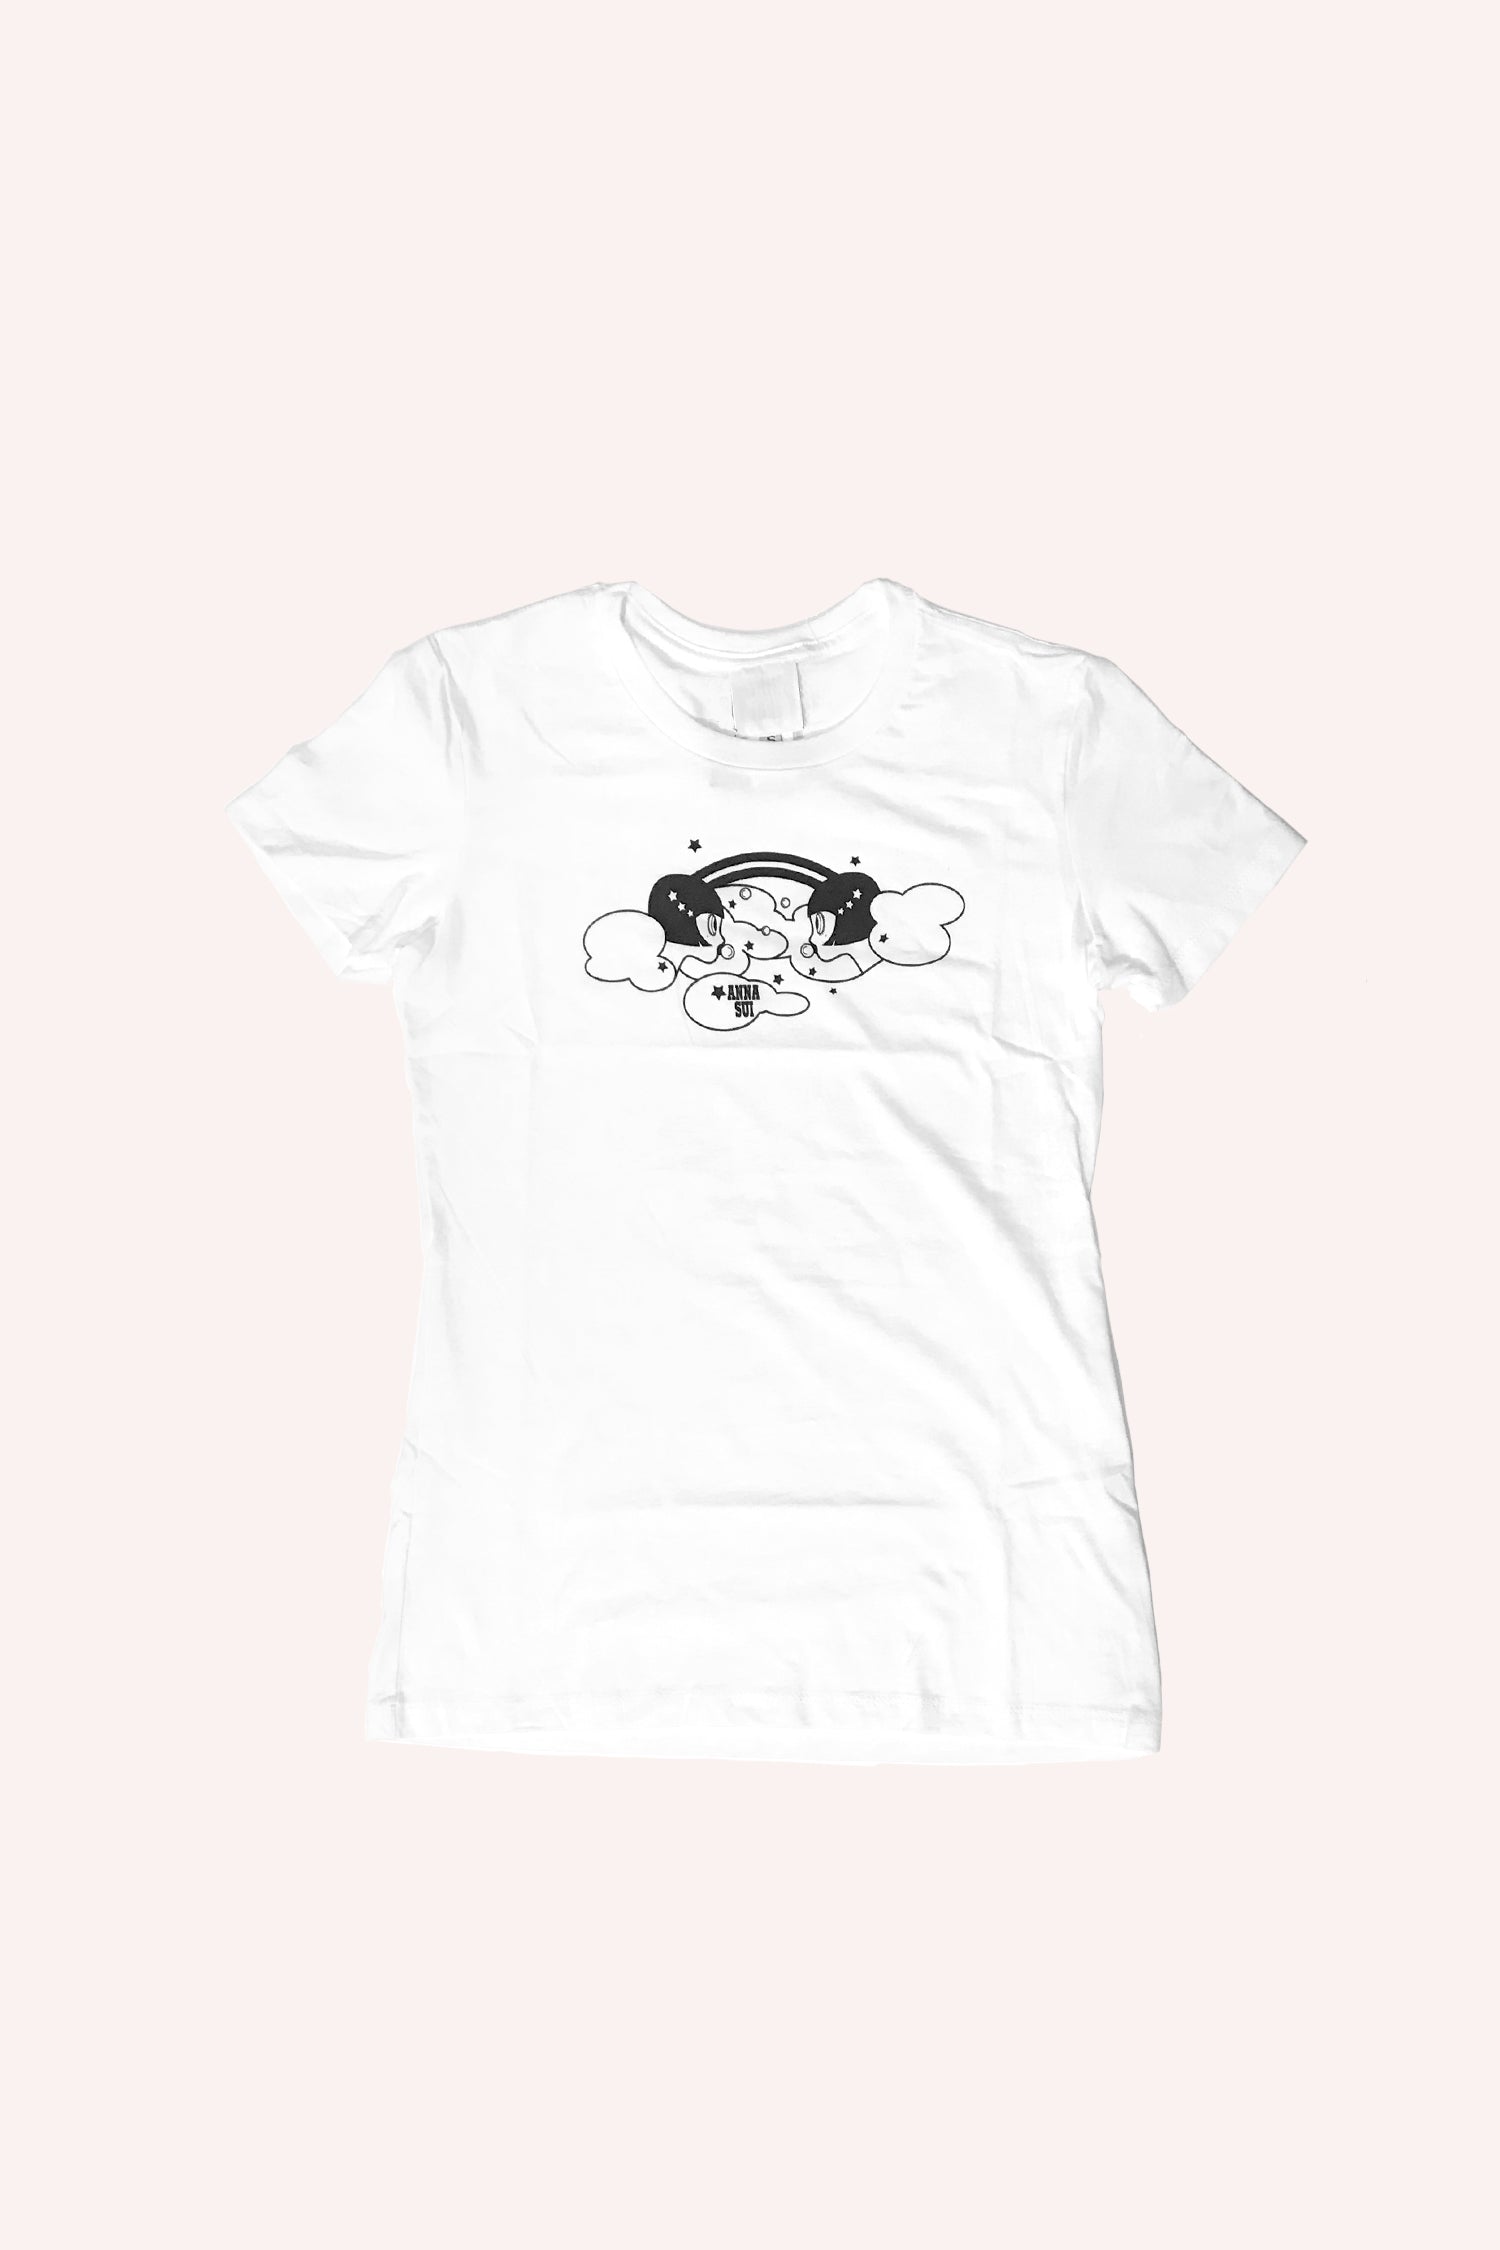 Limited-Edition Tee, short sleeves, white, black round logo of Anna Sui and Bowery Electric labels